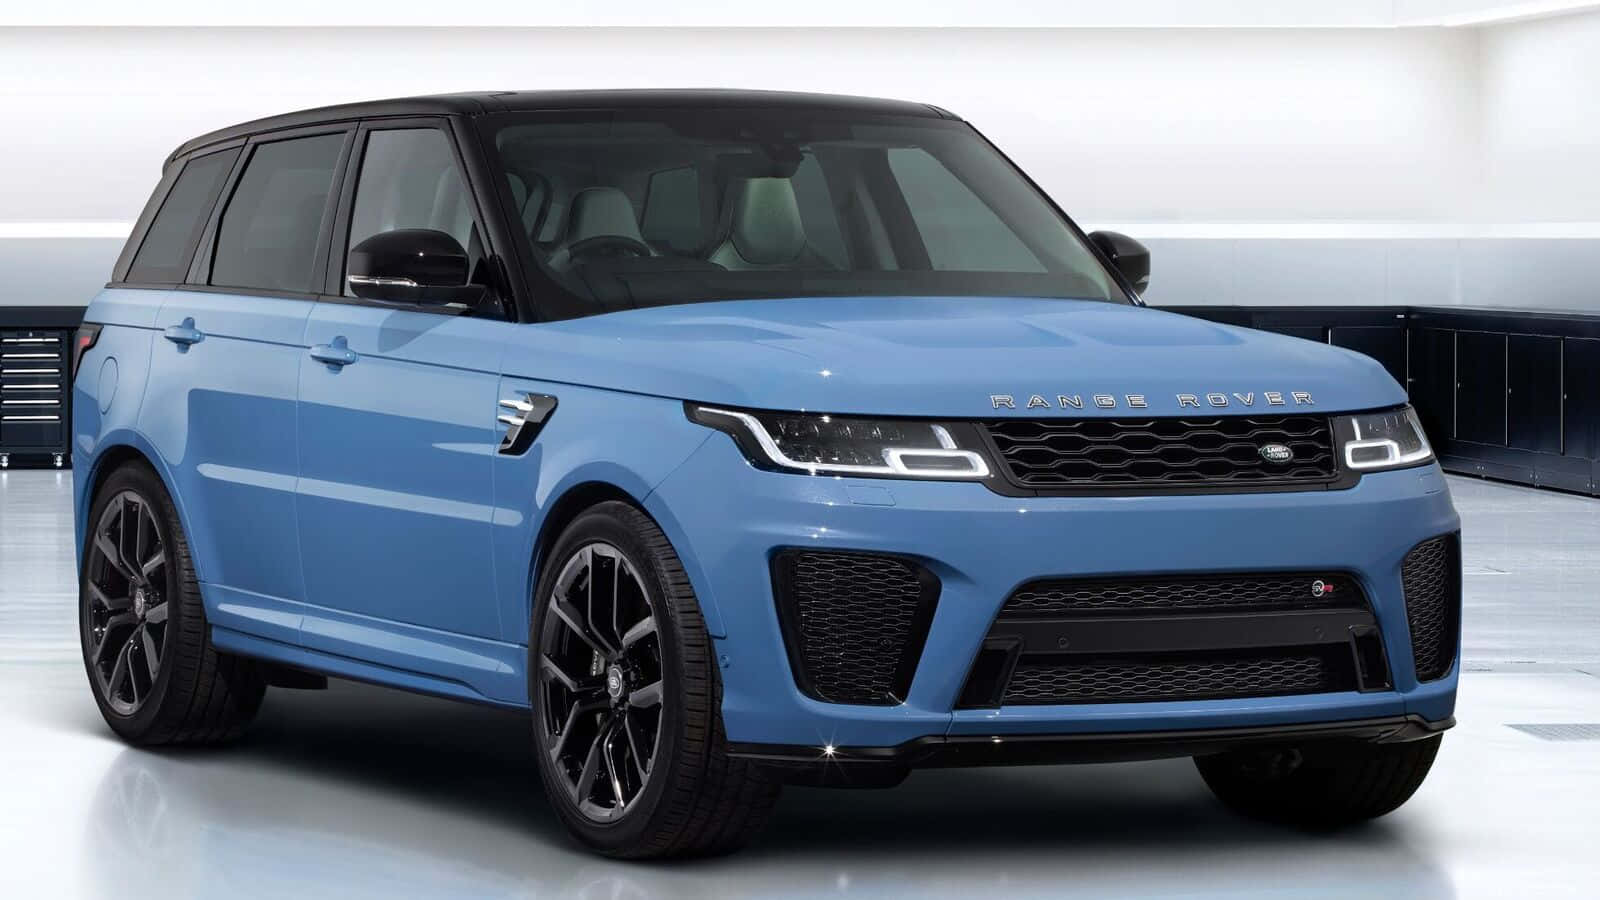 The Blue Land Rover Rover Sport Is Shown In A Garage